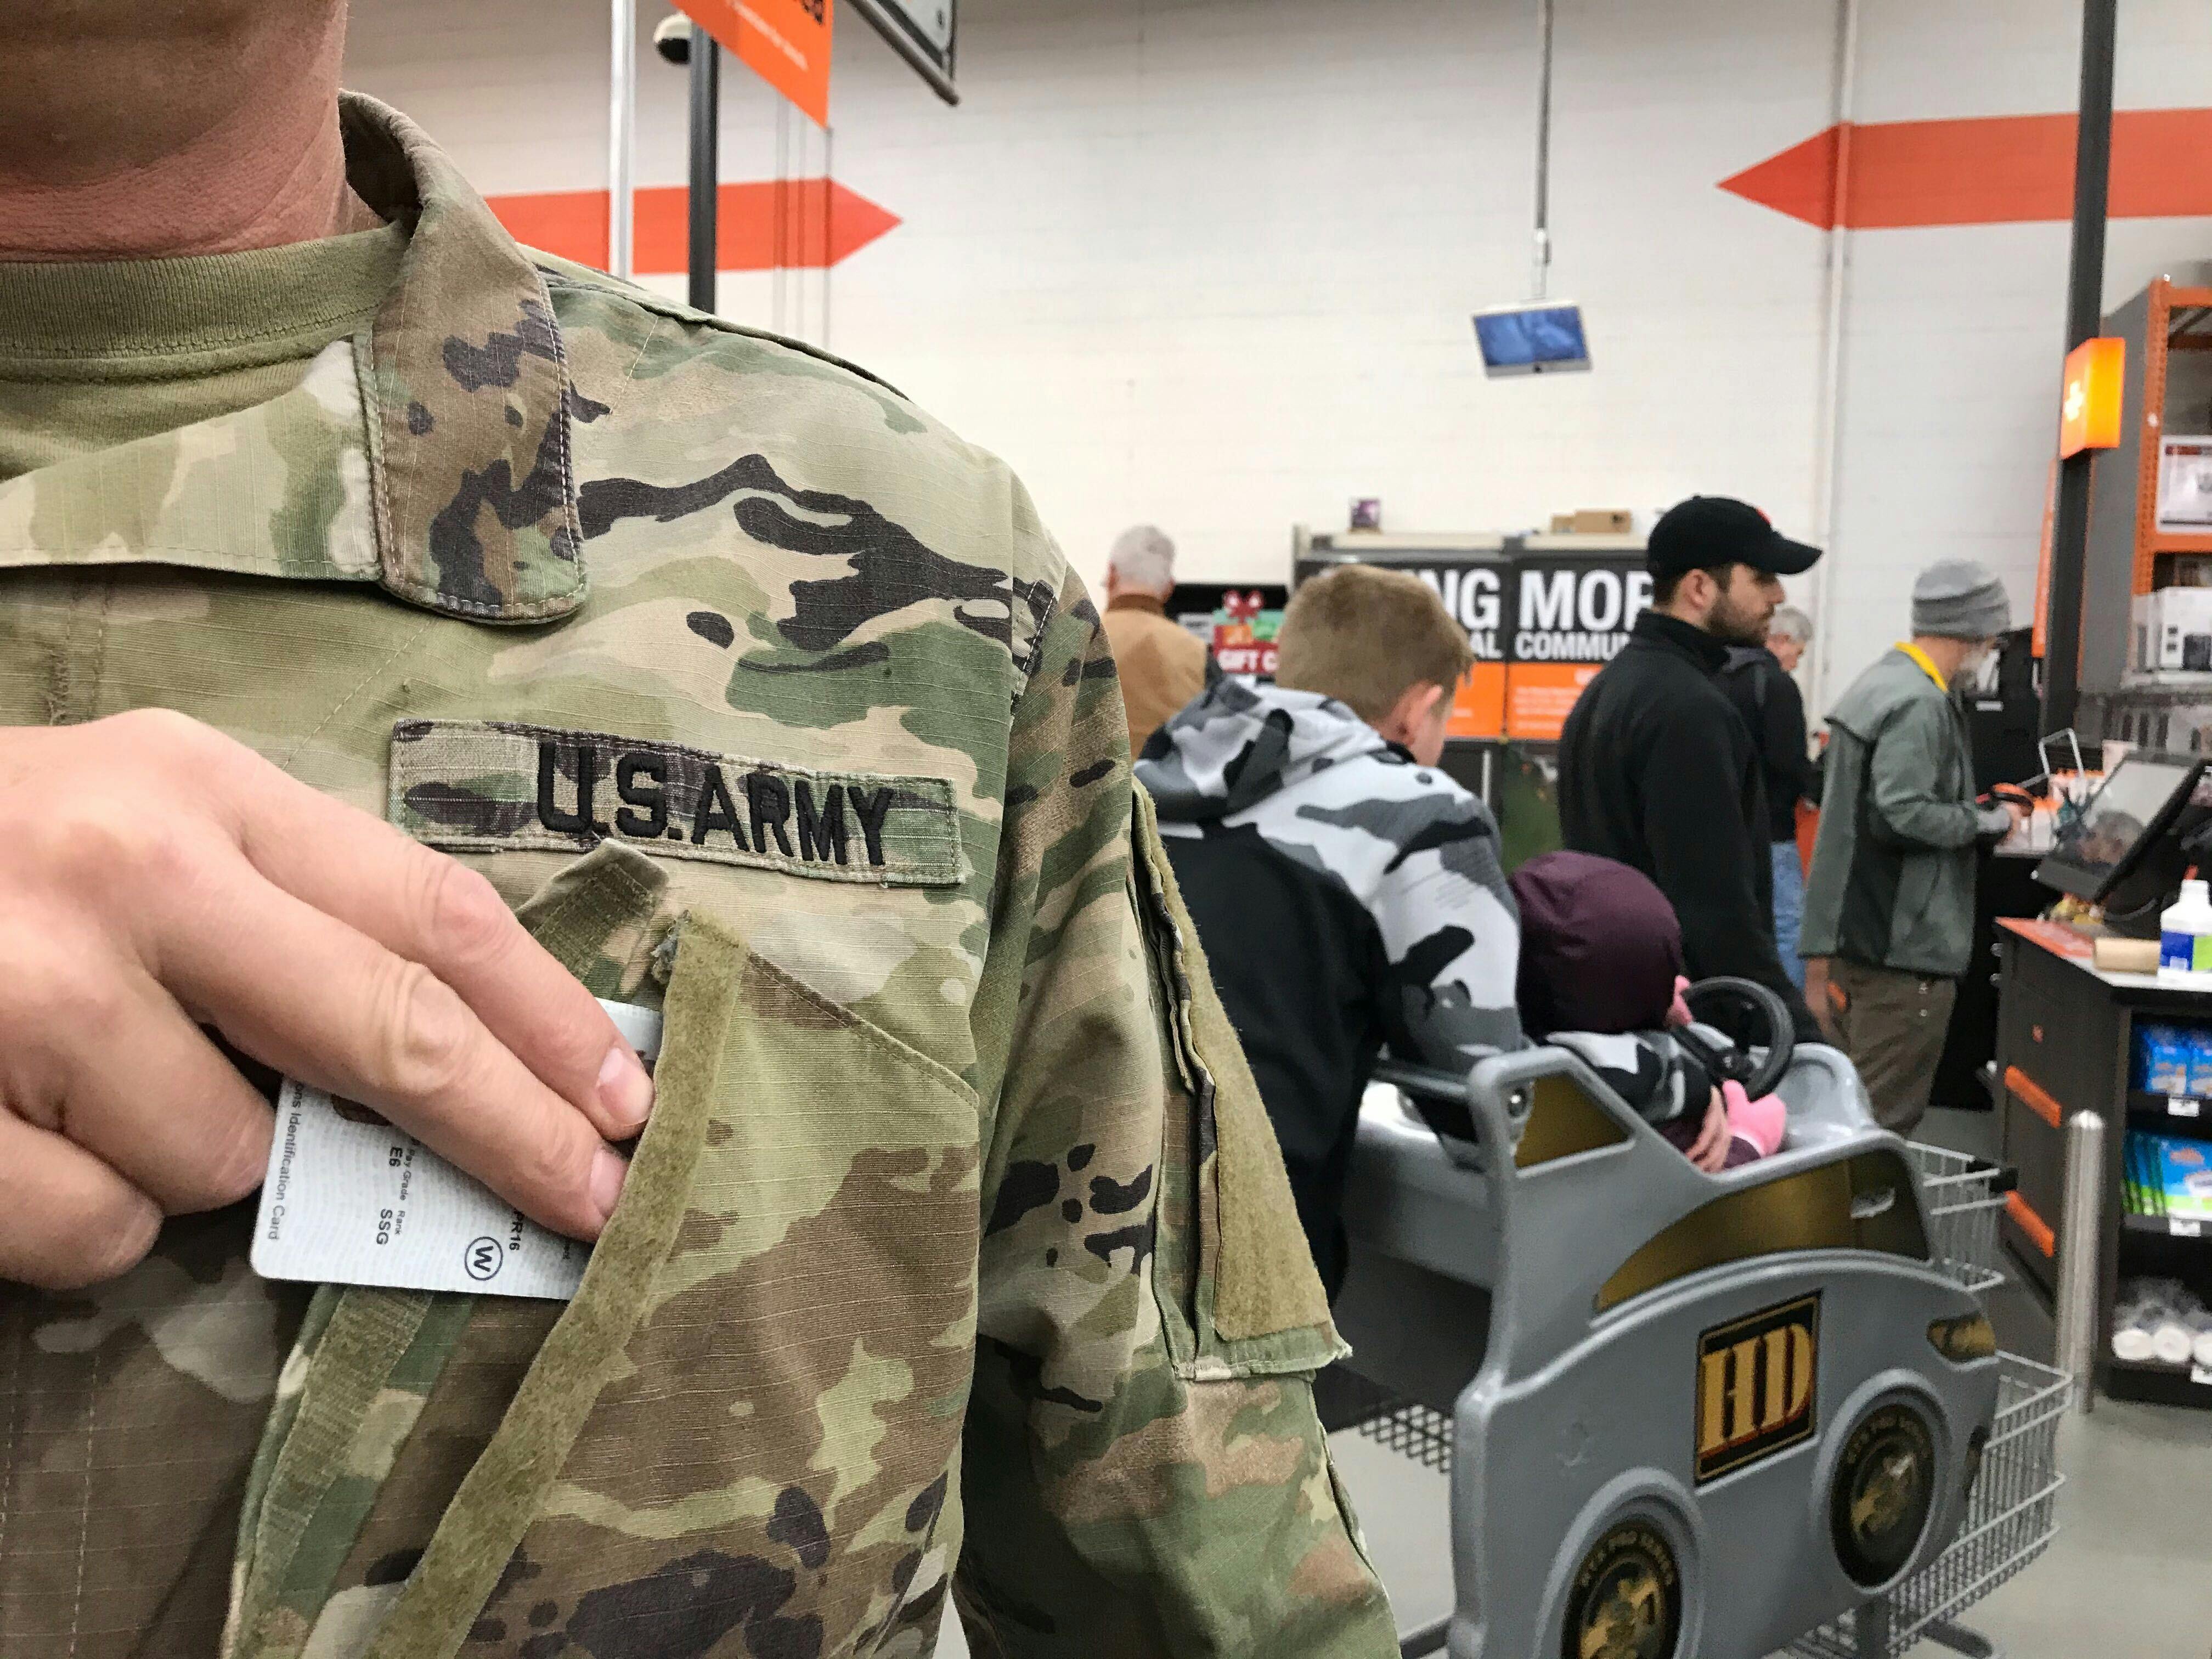 Man pulling out military ID from Army uniform in Home Depot